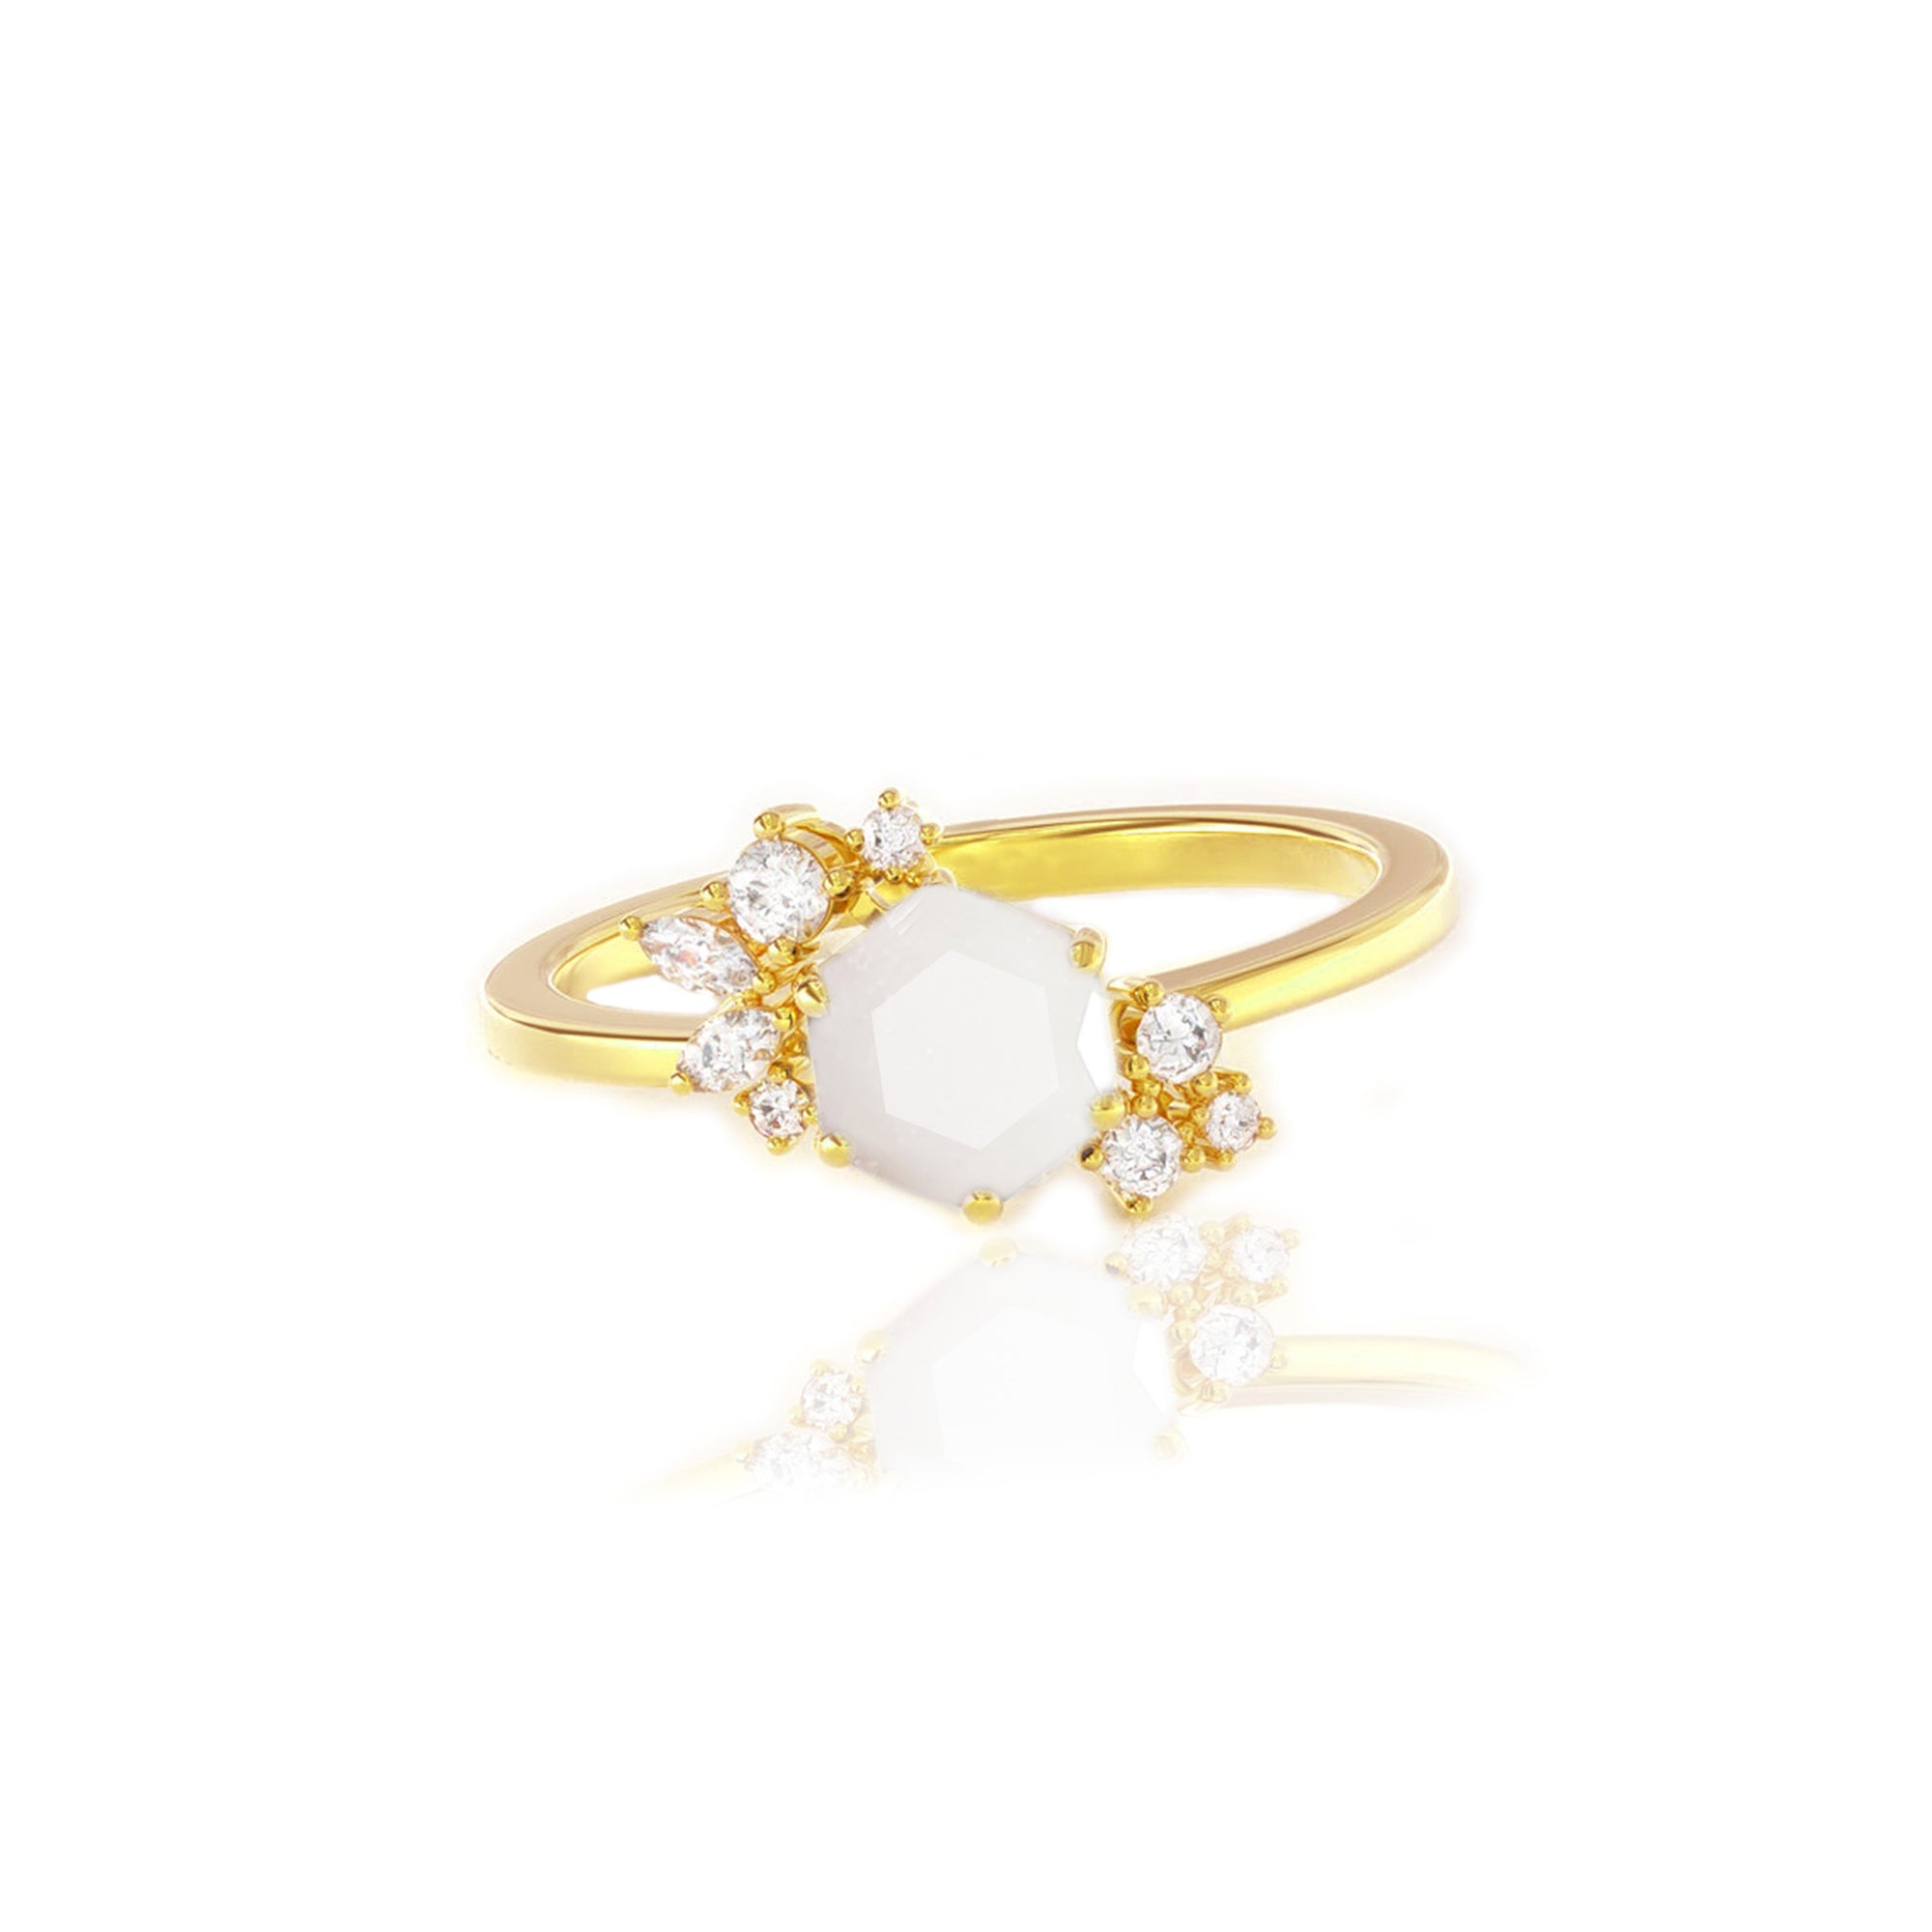 MaternalGrace: Solid Gold Round Breastmilk Ring